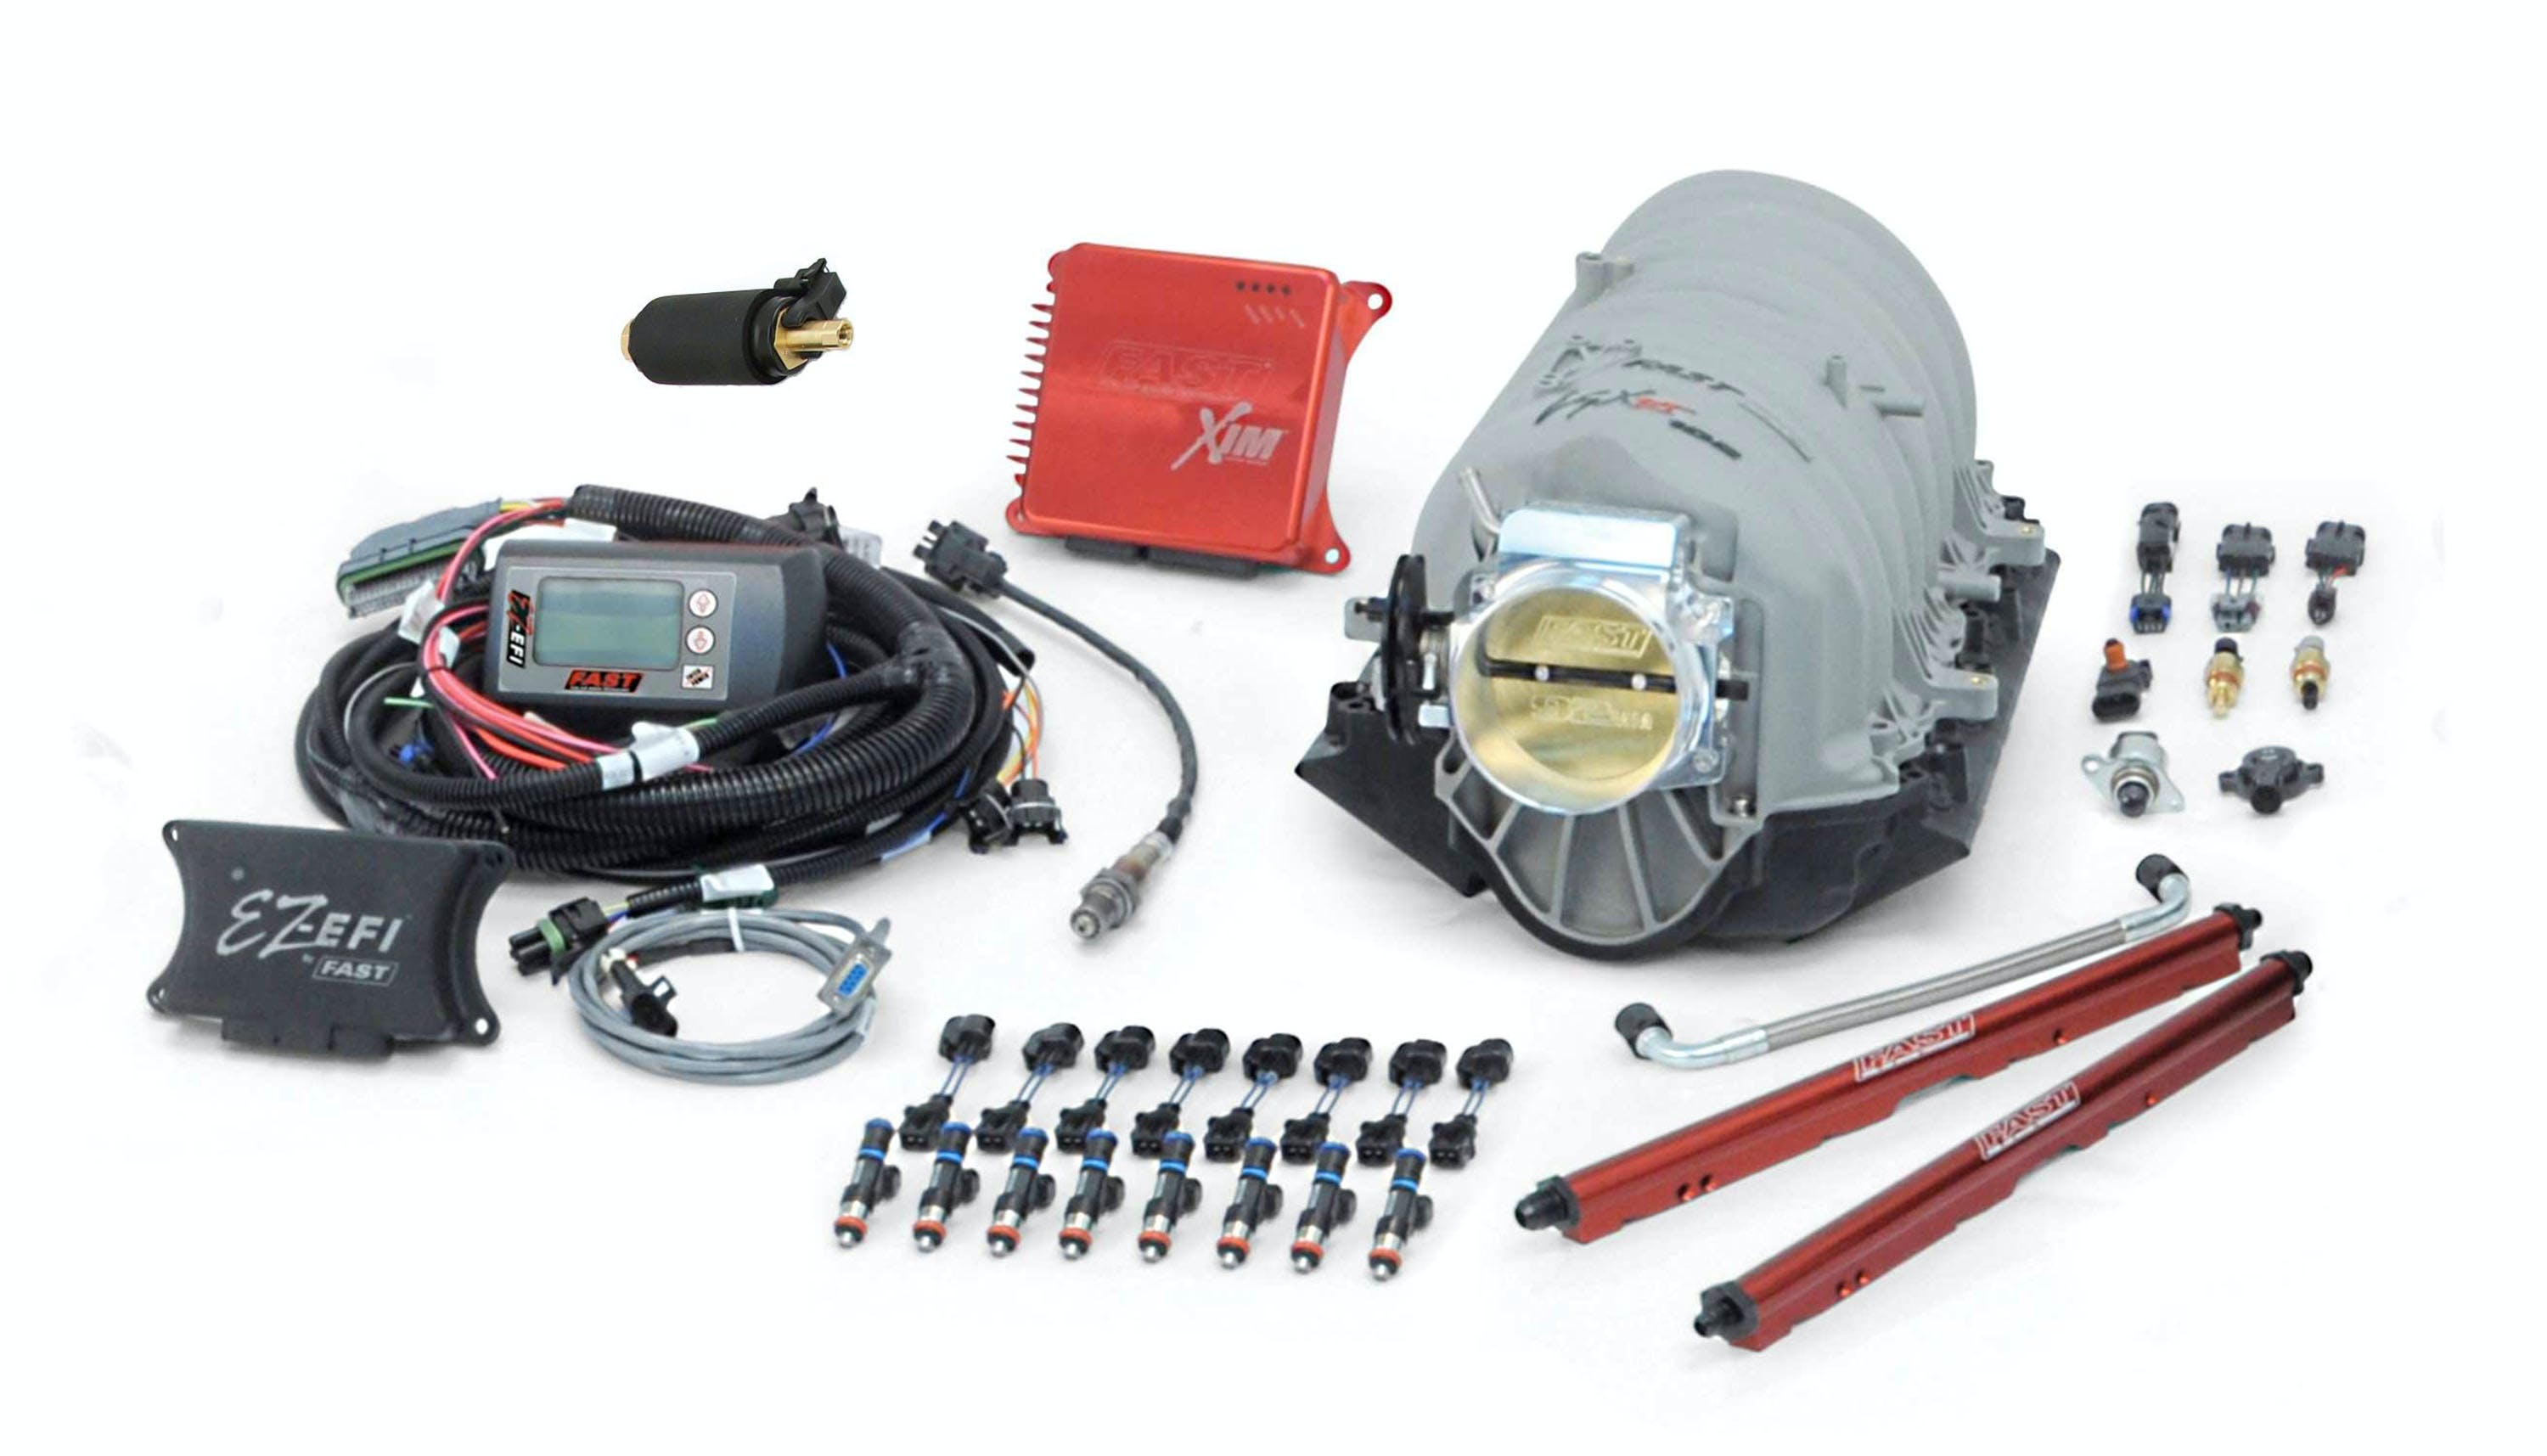 FAST - Fuel Air Spark Technology 302003L LS EZ EFI with XIM, Inline Fuel Pump and Truck Manifold